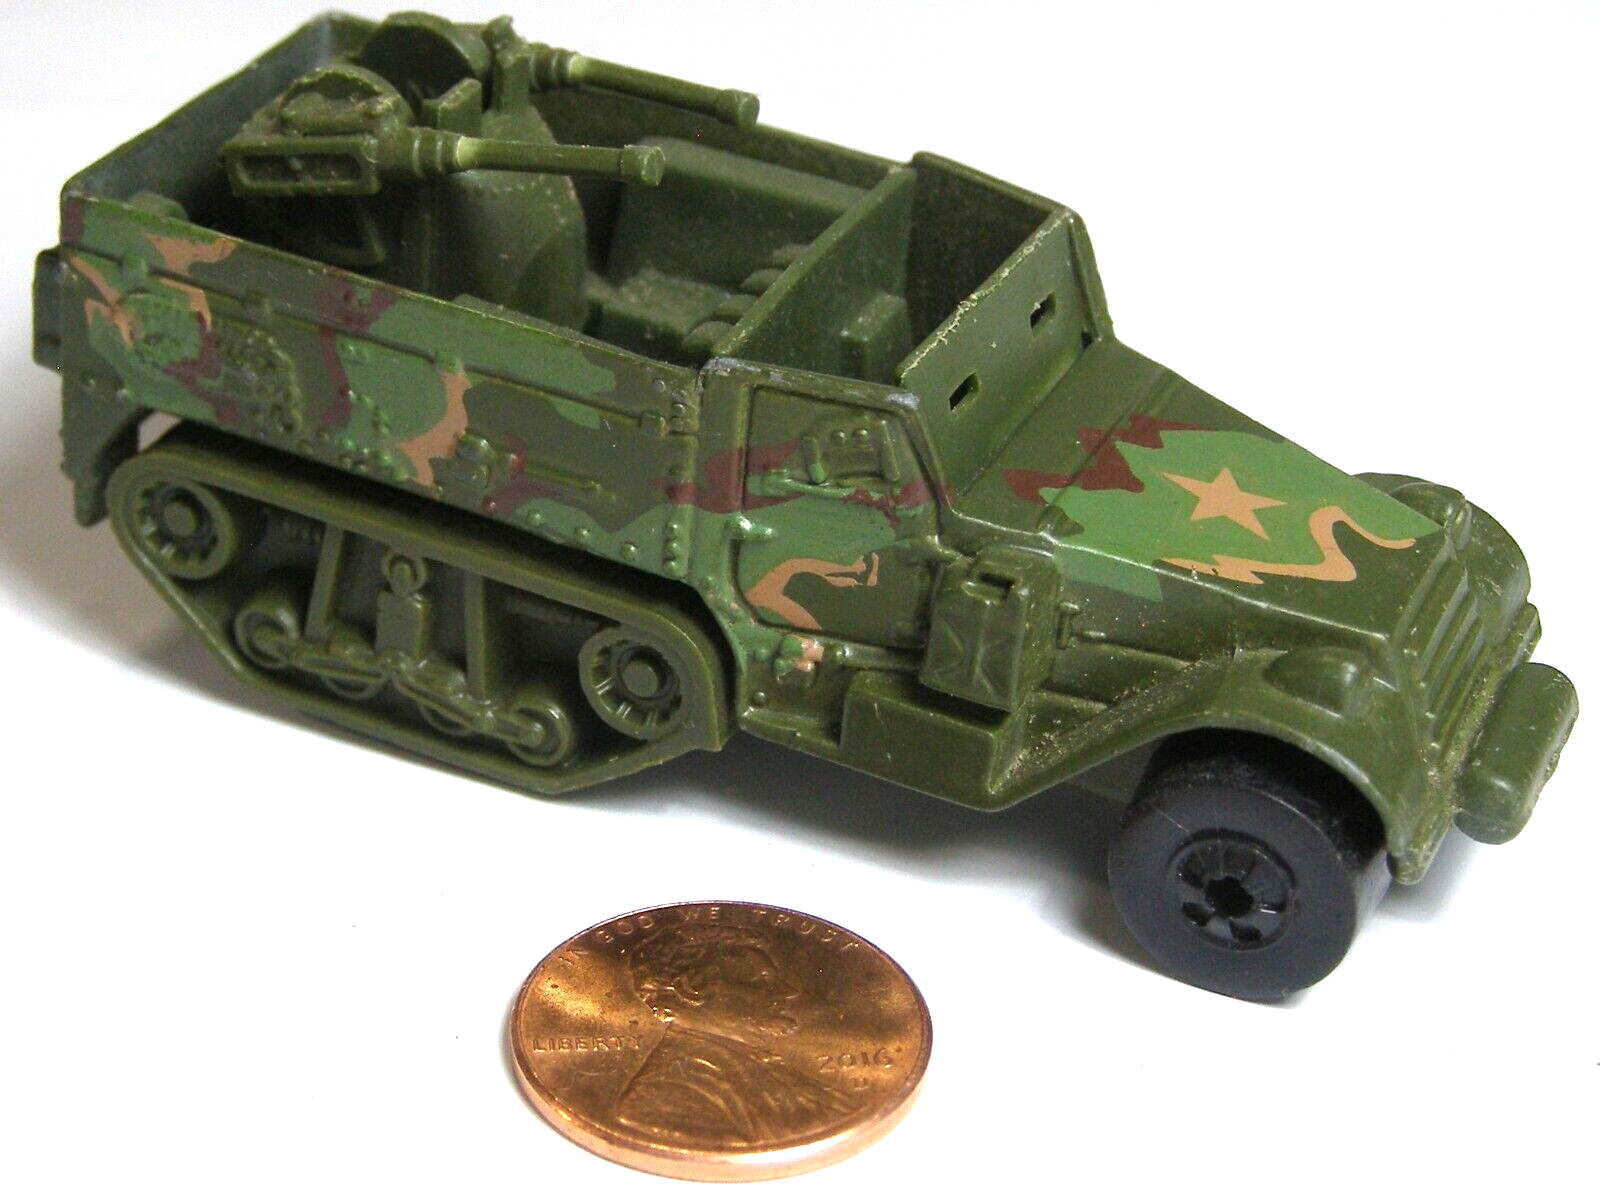 Primary image for Hot Wheels Military Half-Track 1985 Action Command   RZ8